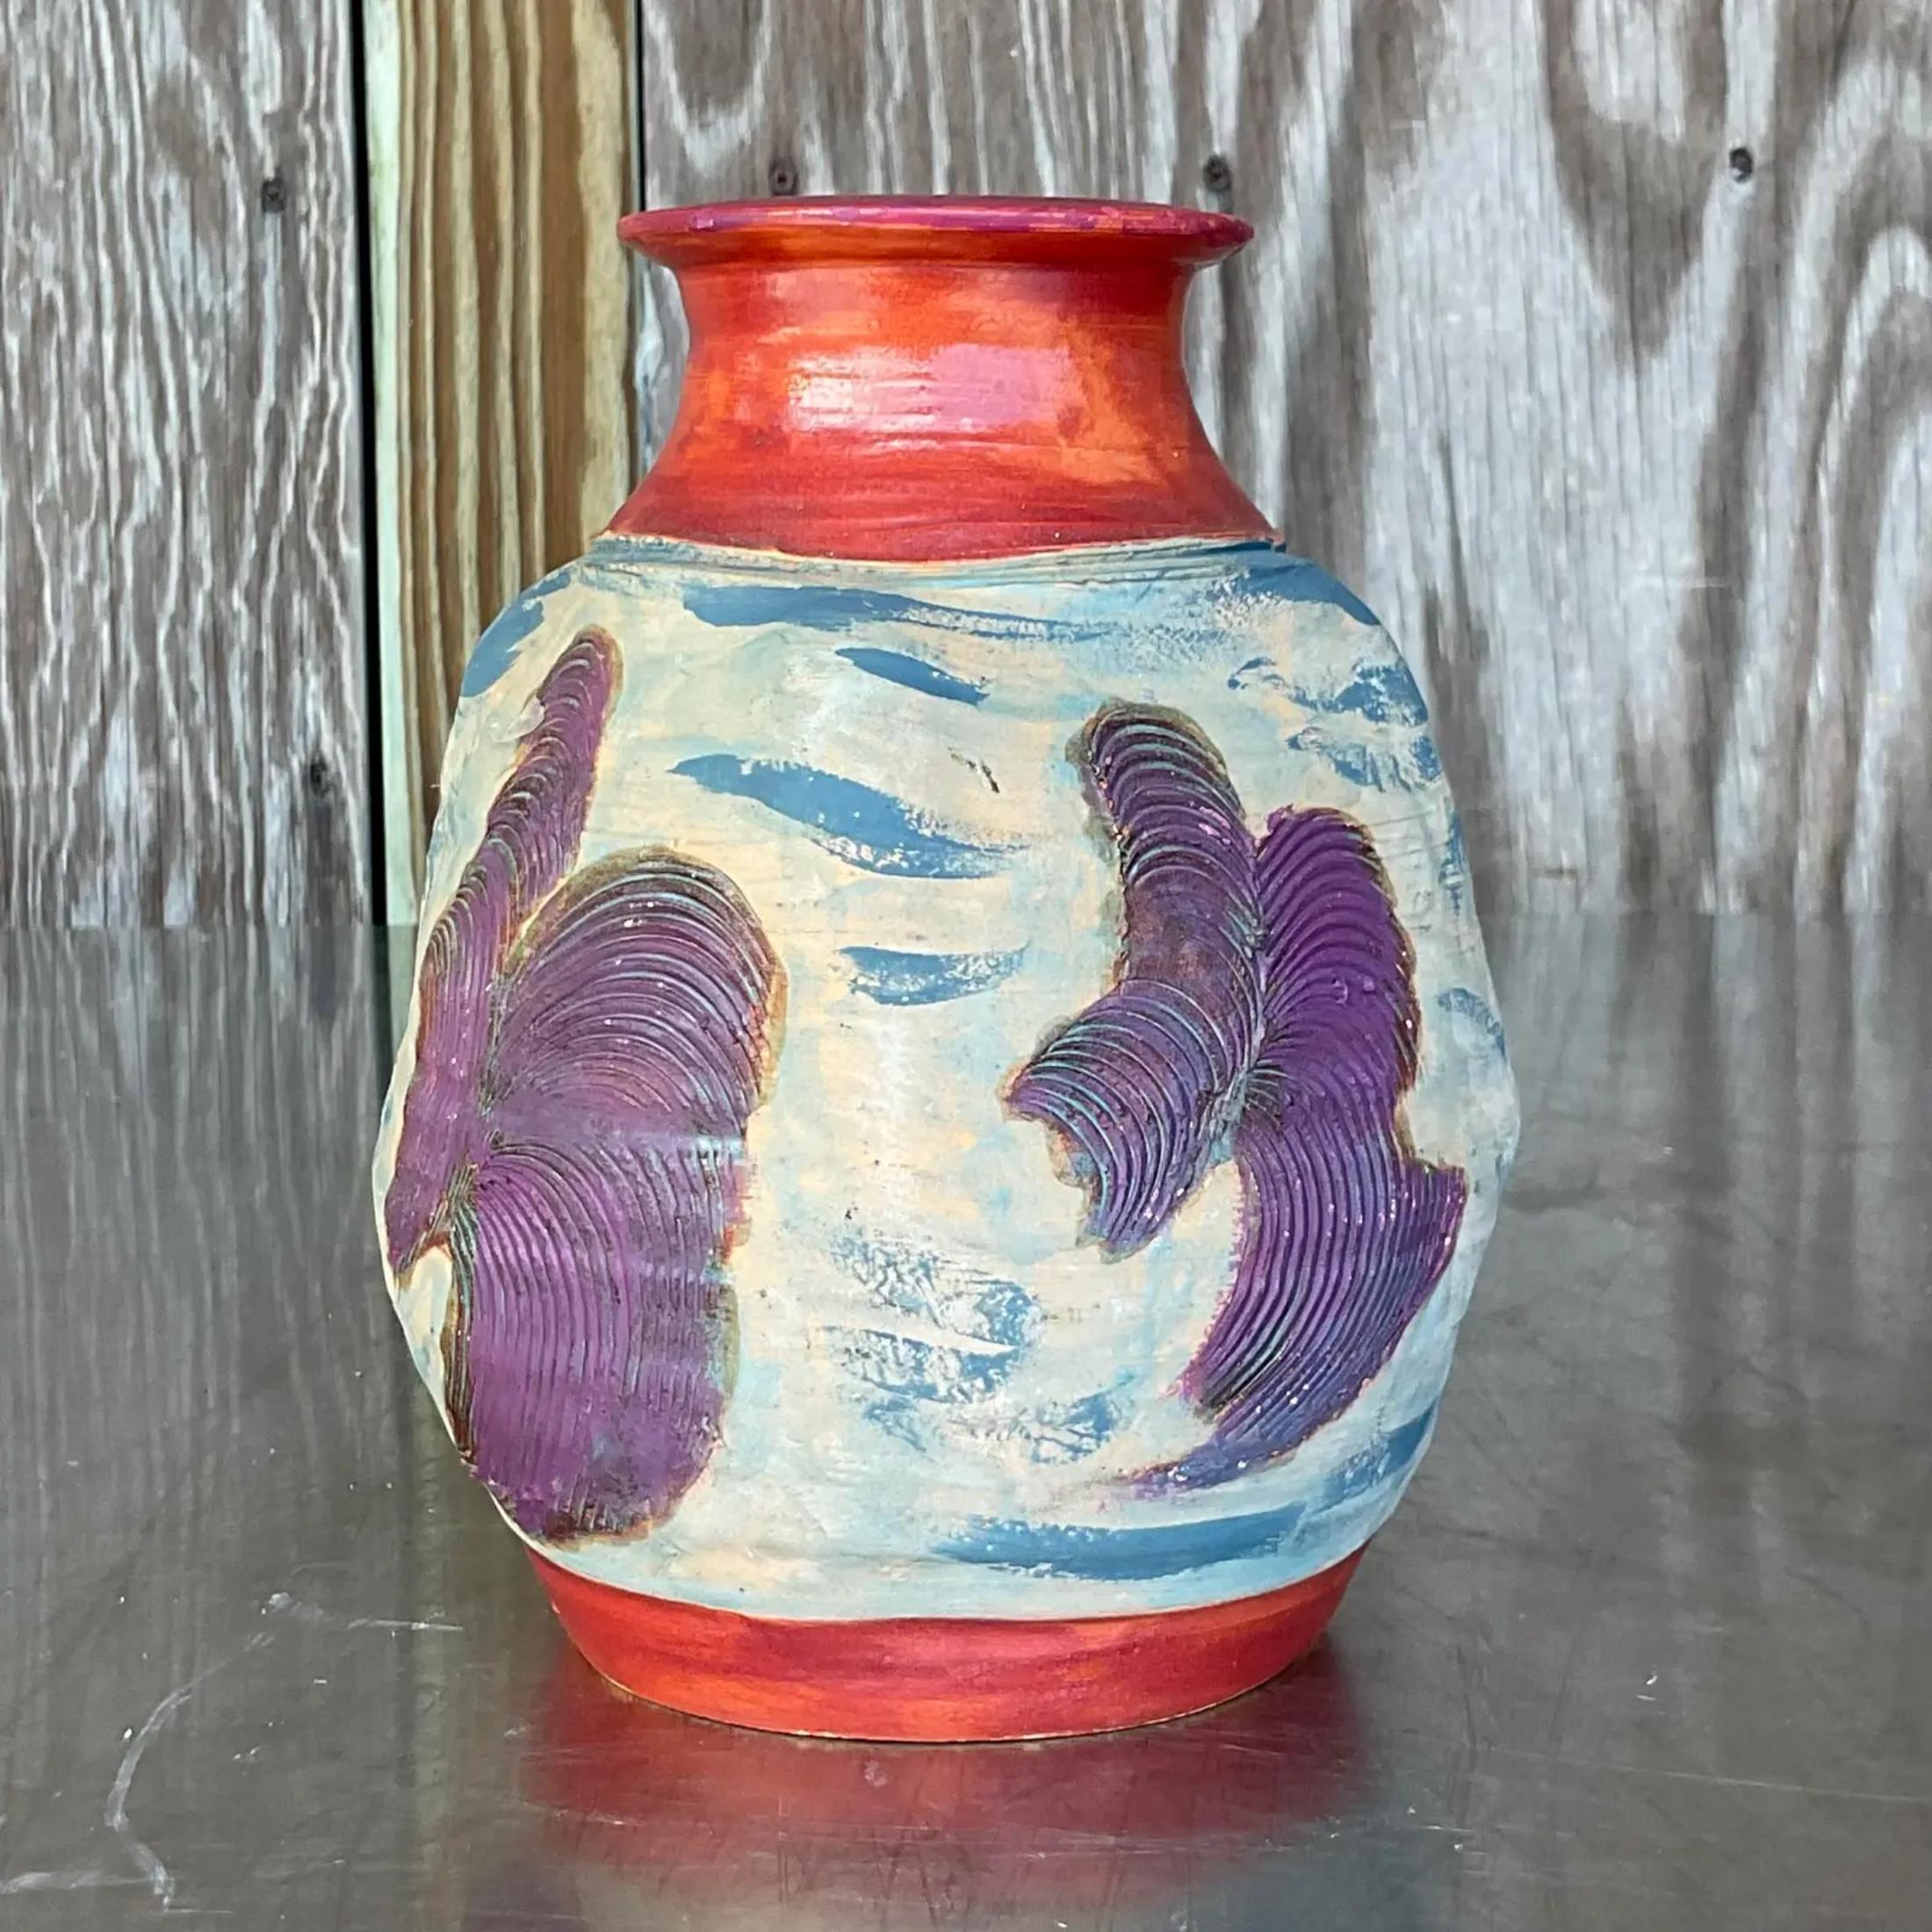 A fabulous vintage Boho studio pottery vase. A chic little work with brightly colored hand painted detail. Acquired from a Palm Beach estate